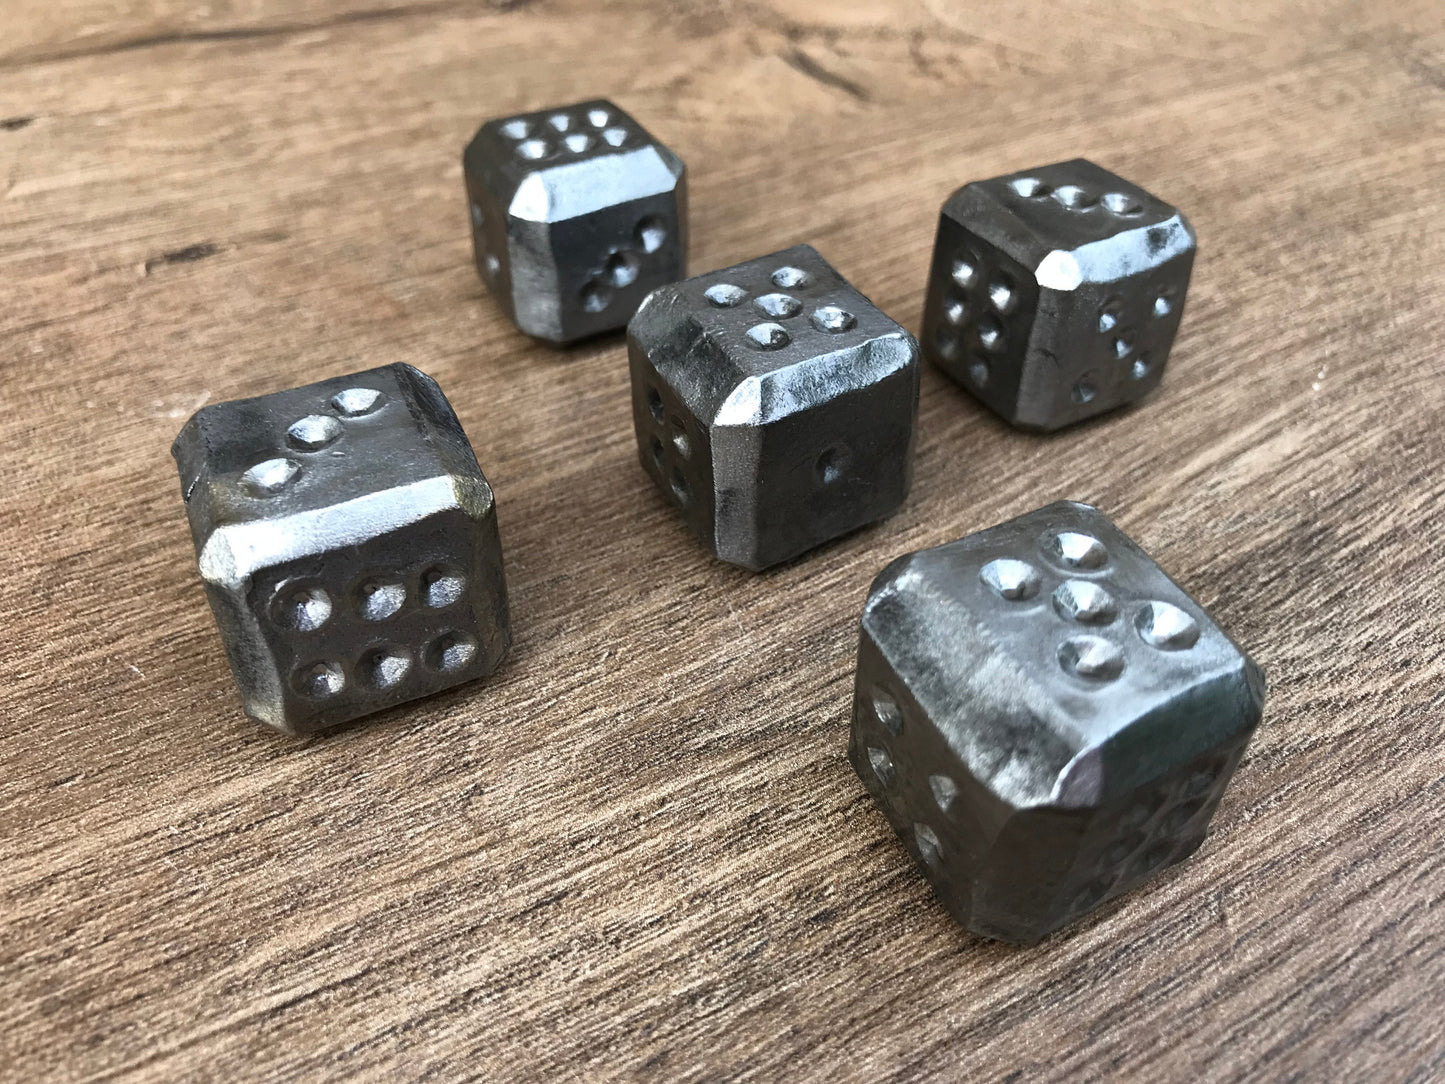 6th anniversary, iron dices, iron gift, iron anniversary, set of dices, custom dice, gambling dice, gaming dice, dice games, tabletop game